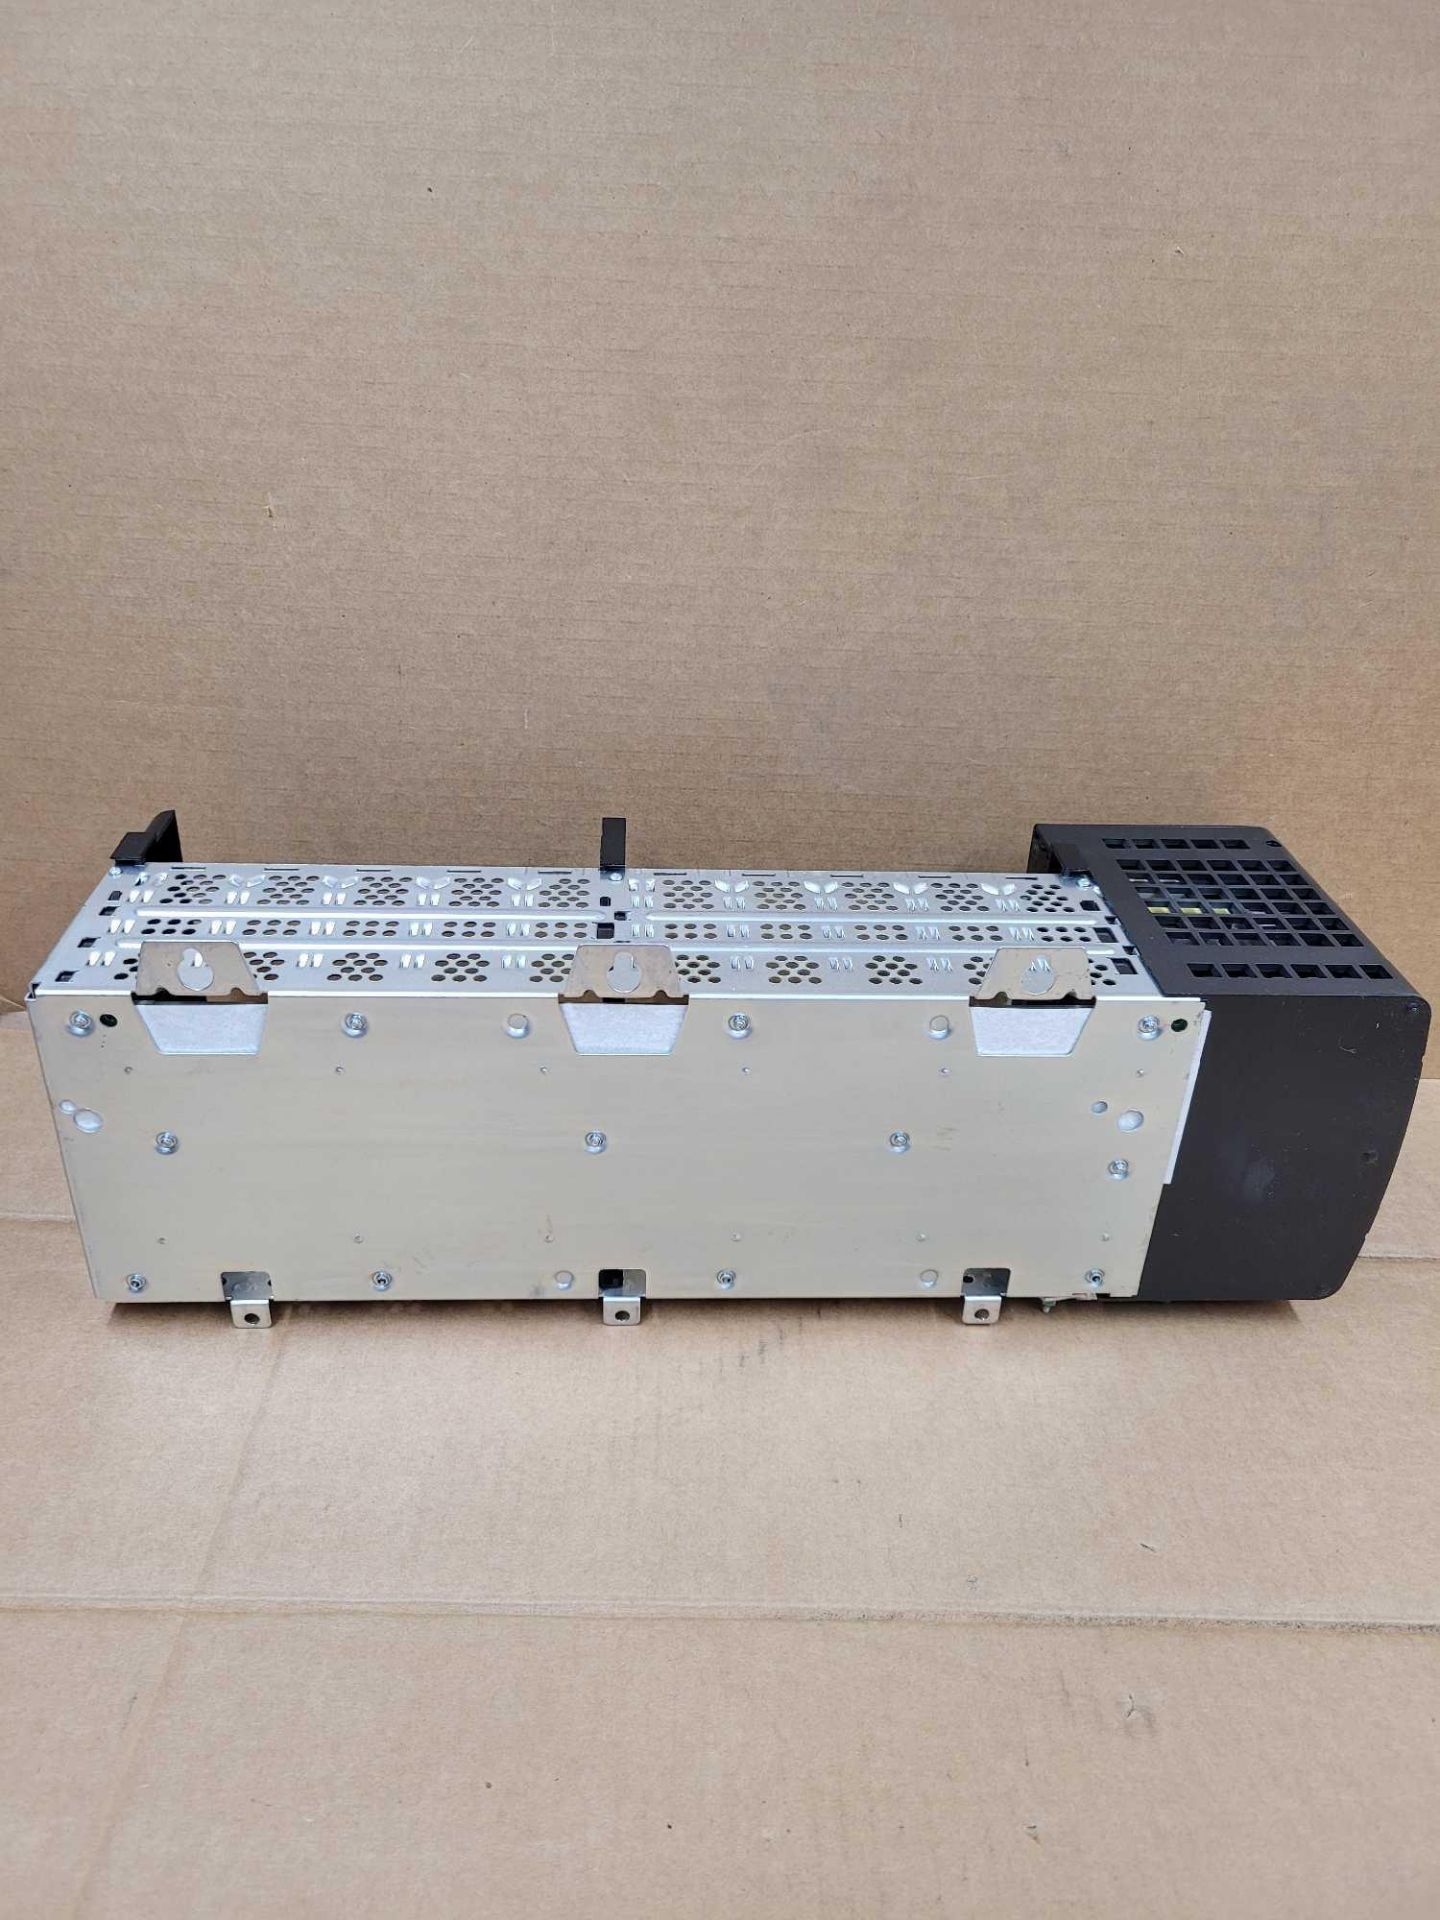 ALLEN BRADLEY 1756-PA75/B with 1756-A10  /  Series B Power Supply with Series B 10 Slot Chassis  / - Image 7 of 12